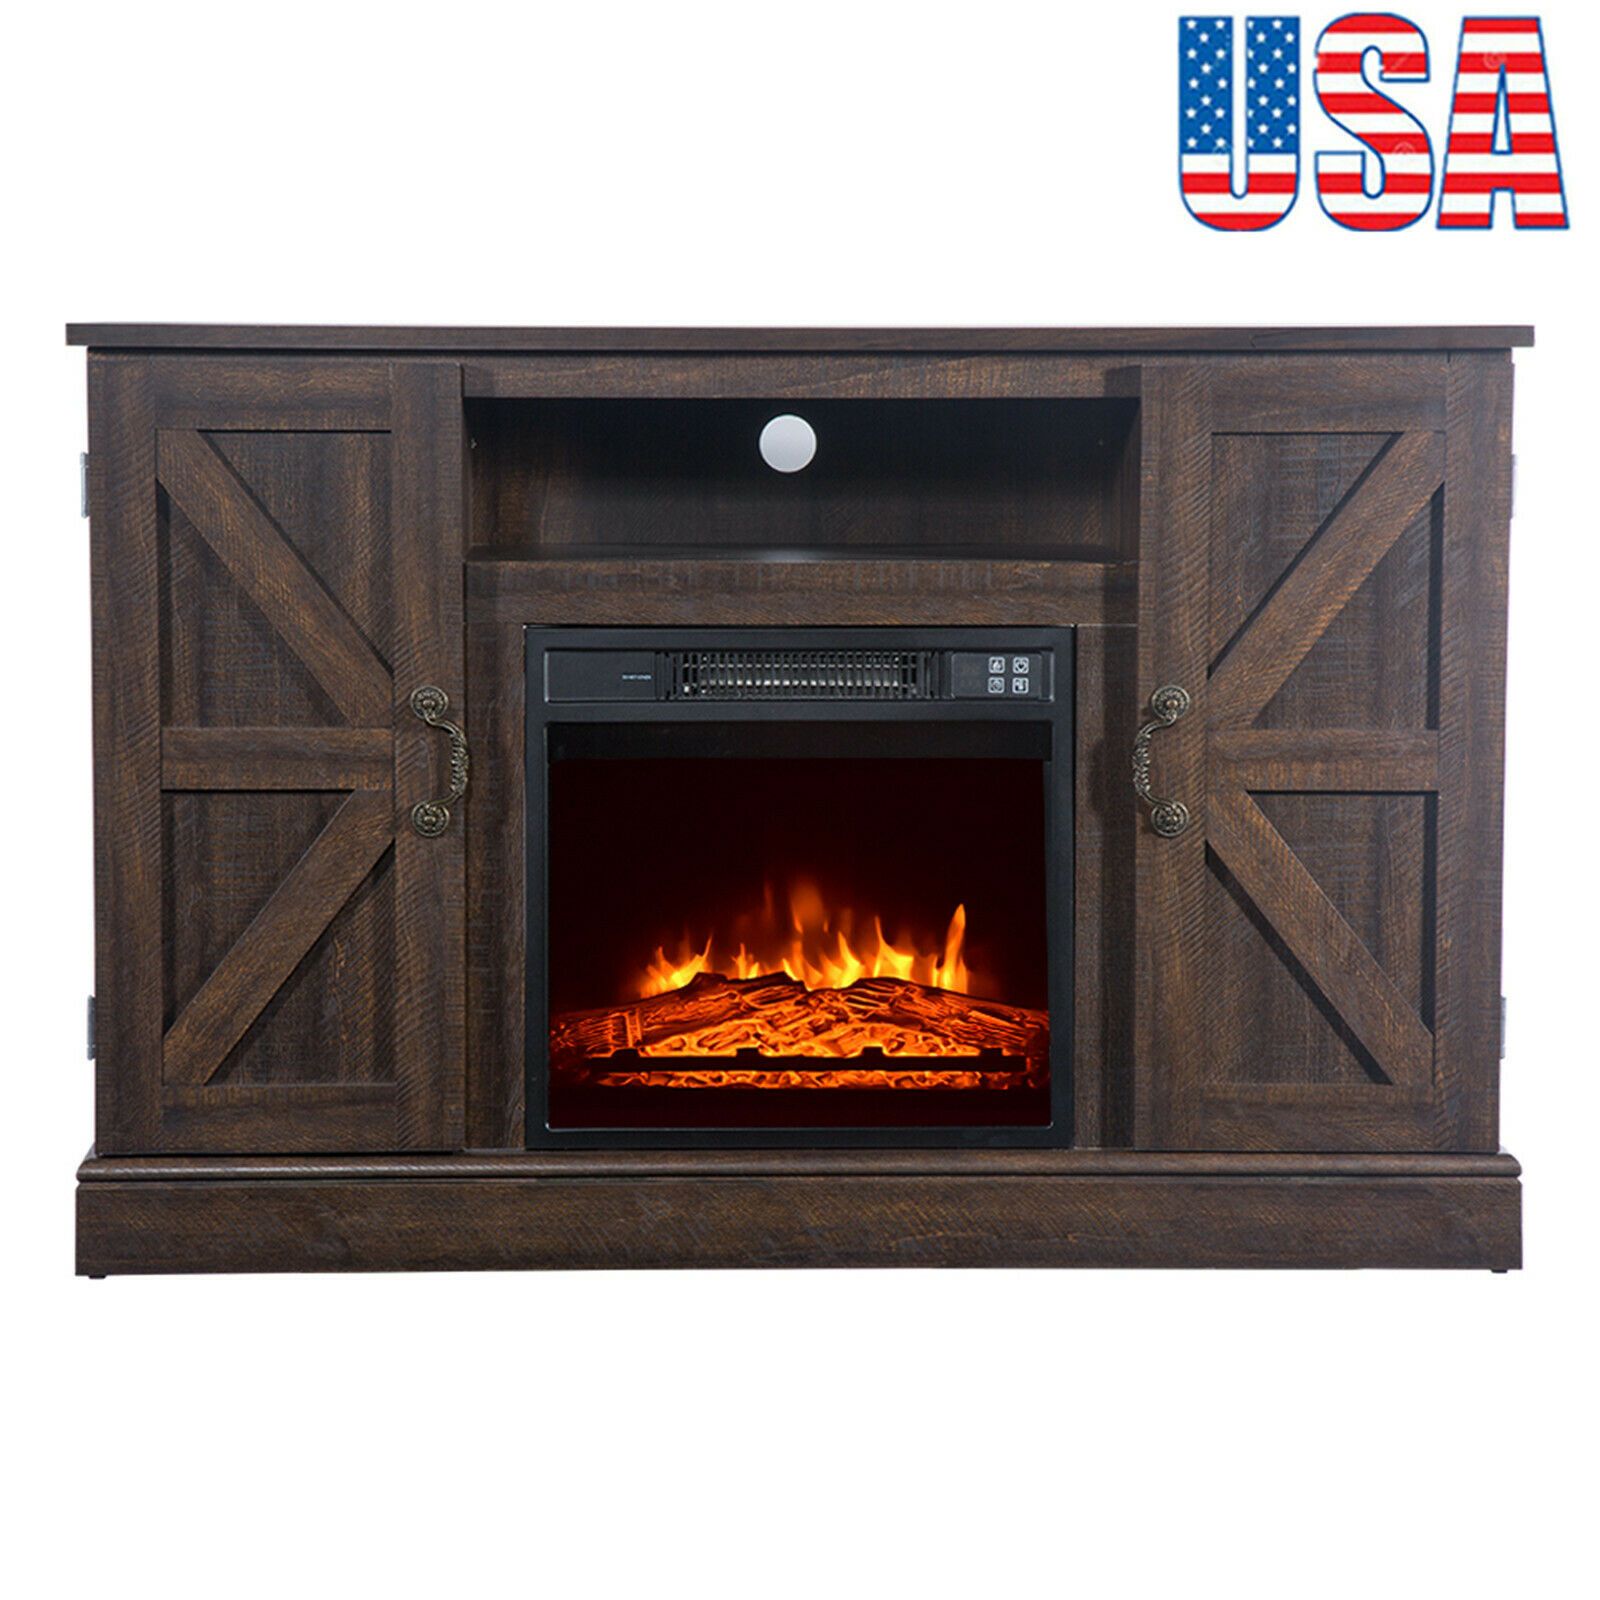 New Arrival Rustic Wood Fireplace Tv Stand For 50 Intended For Rustic Grey Tv Stand Media Console Stands For Living Room Bedroom (Photo 10 of 15)